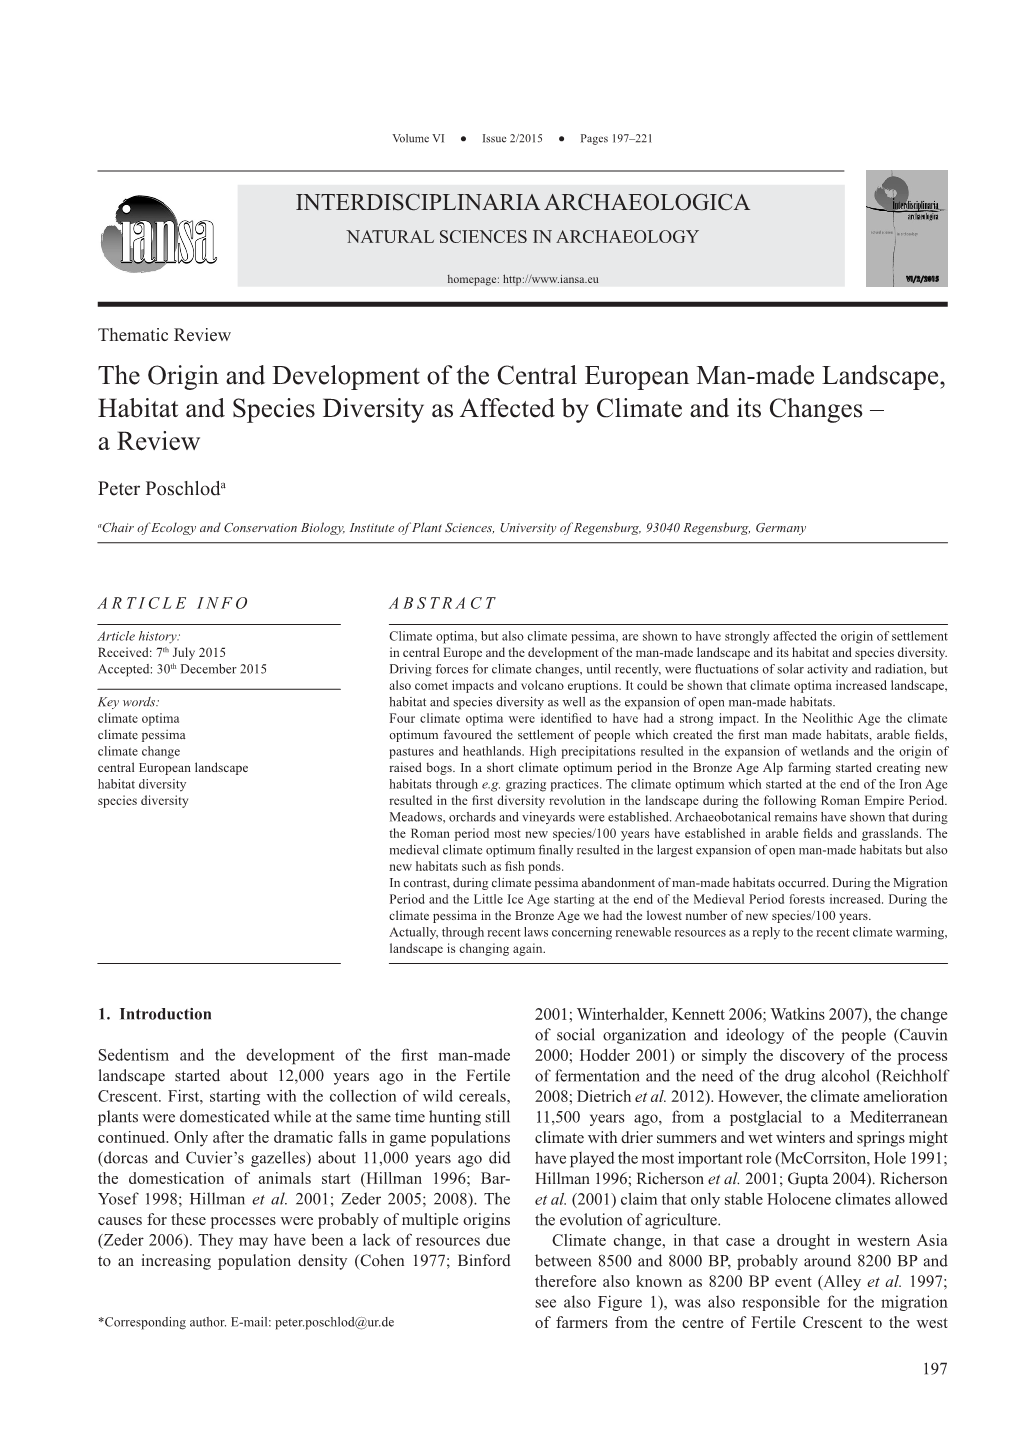 The Origin and Development of the Central European Man-Made Landscape, Habitat and Species Diversity As Affected by Climate and Its Changes – a Review